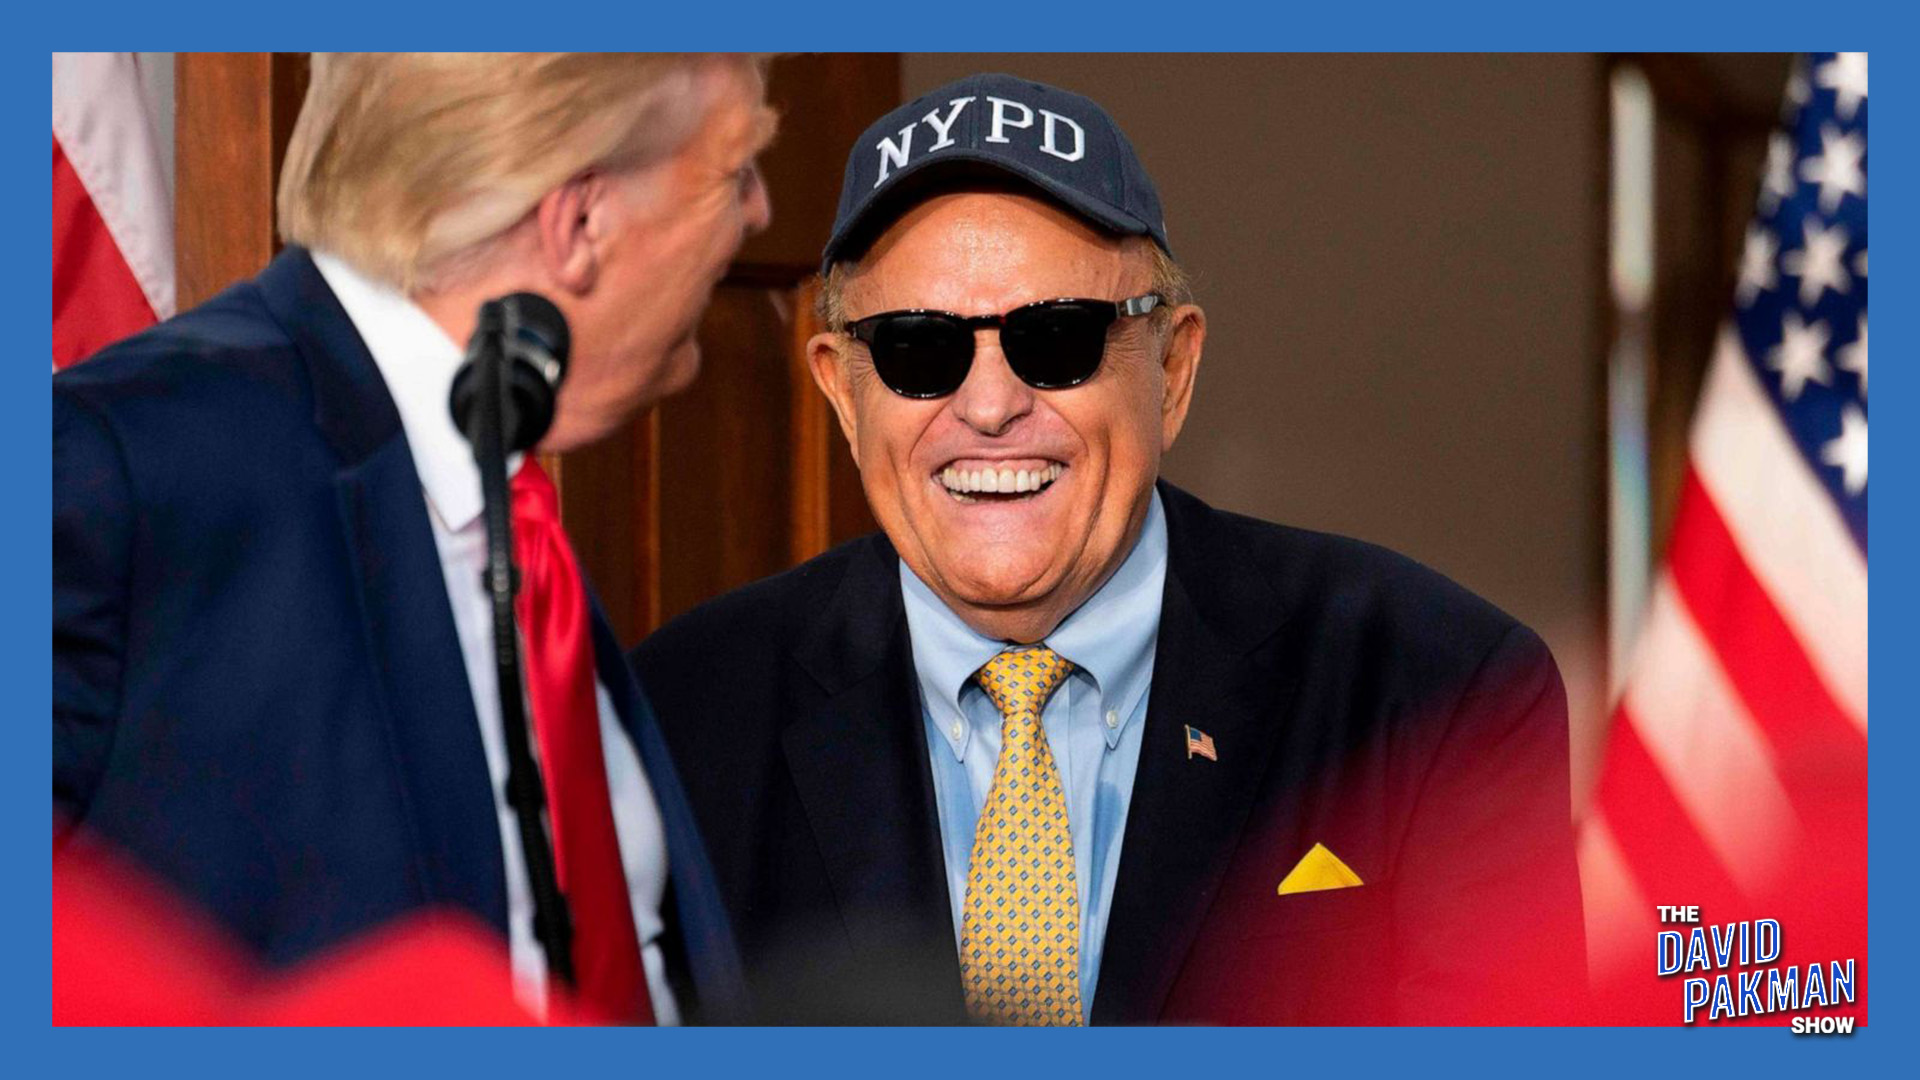 OOPS: Rudy Giuliani Admits to Pardon Request, Then Deletes It